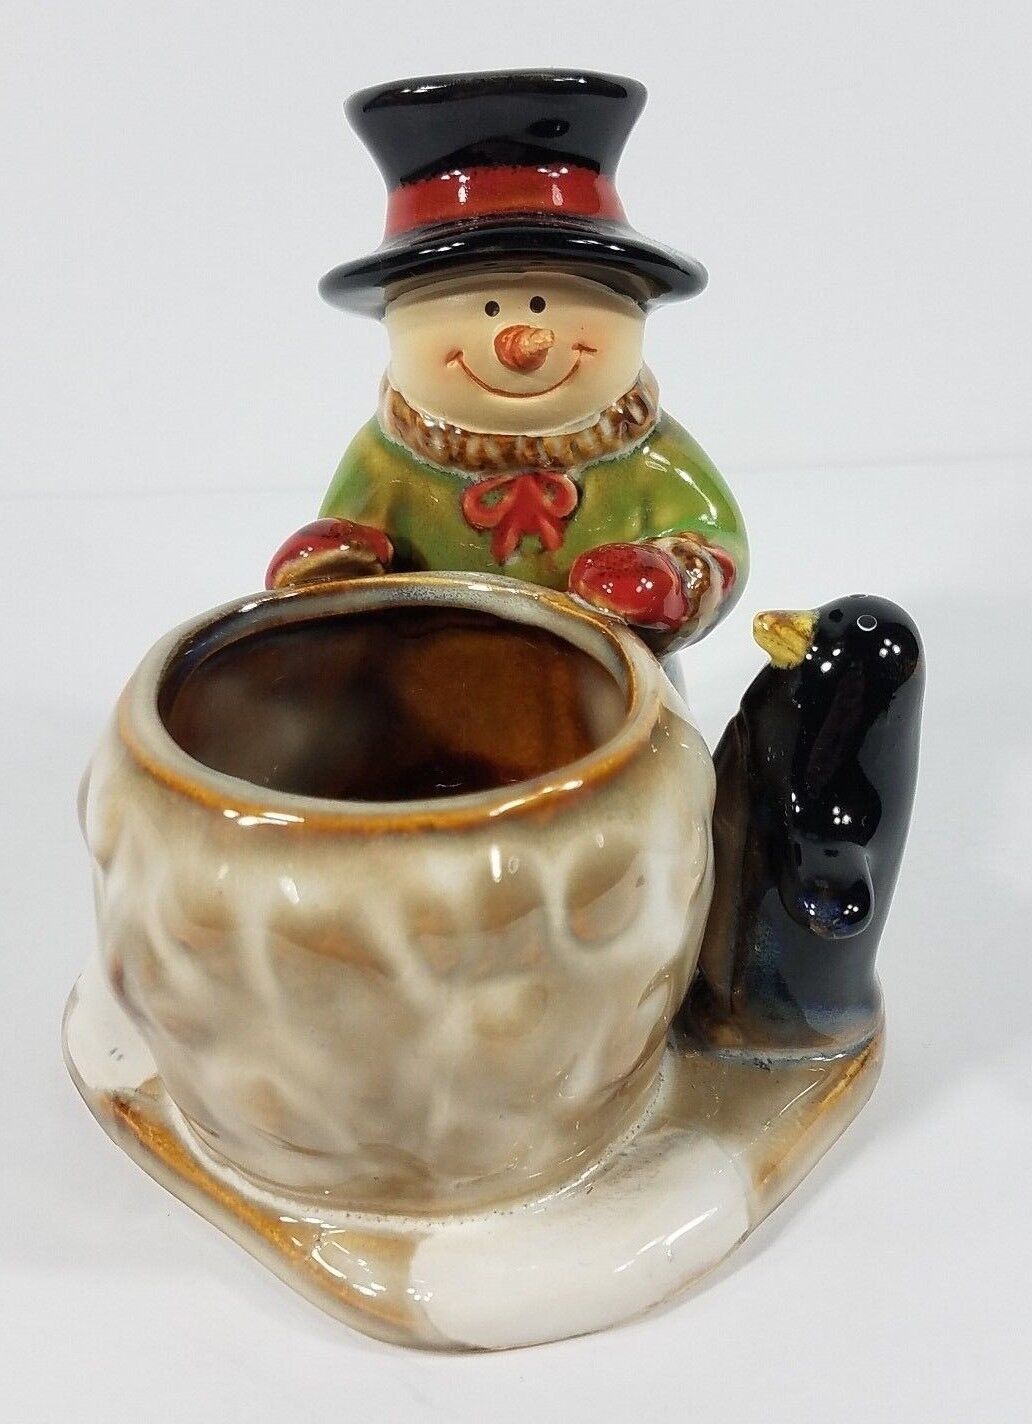 Yankee Candle Snowman Penguin Ronnie Walter ceramic holiday decorative votive